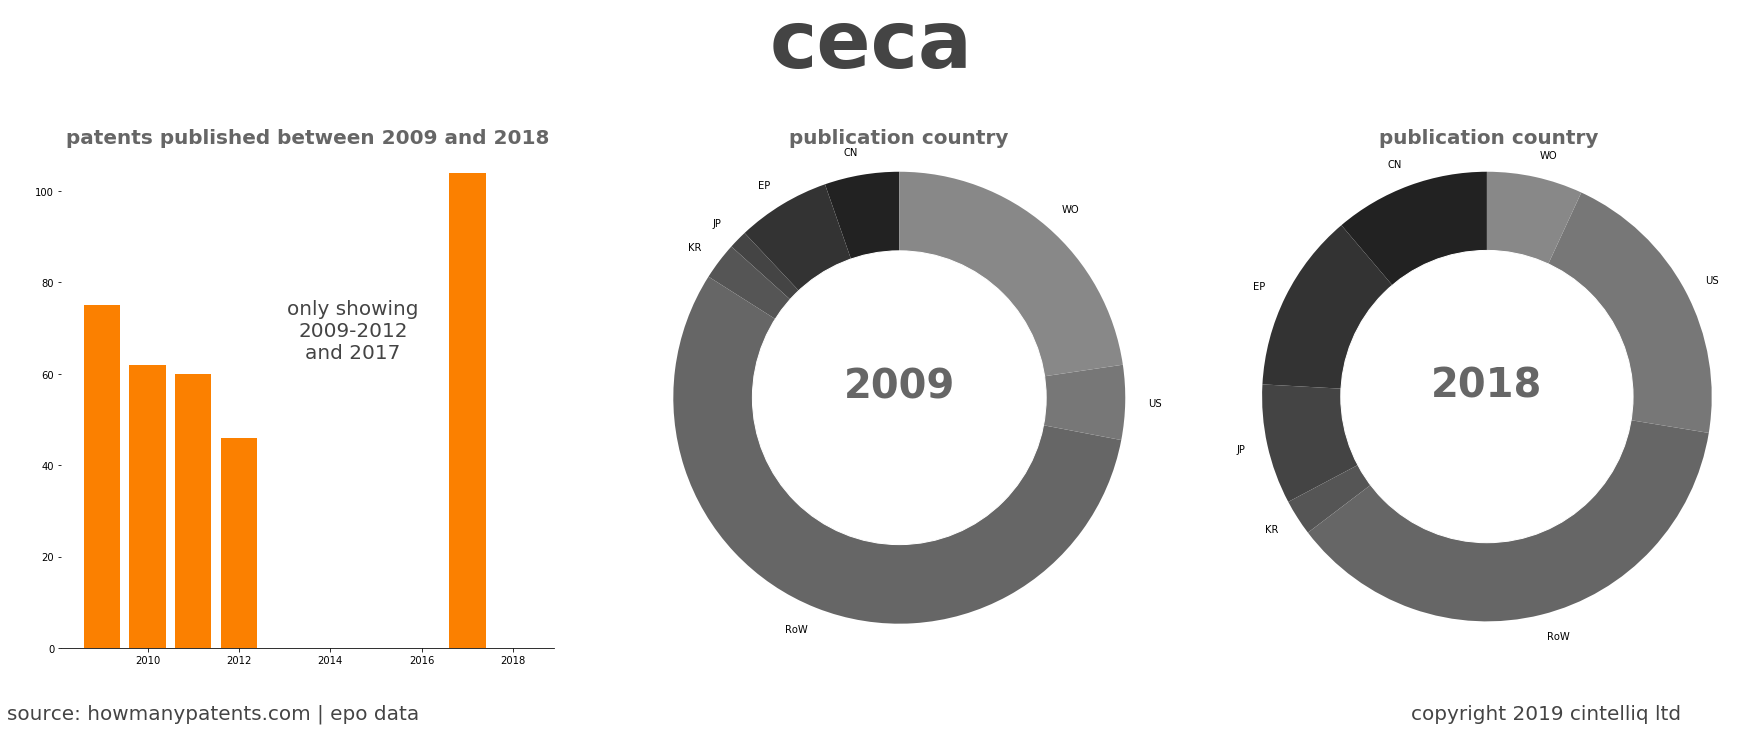 summary of patents for Ceca